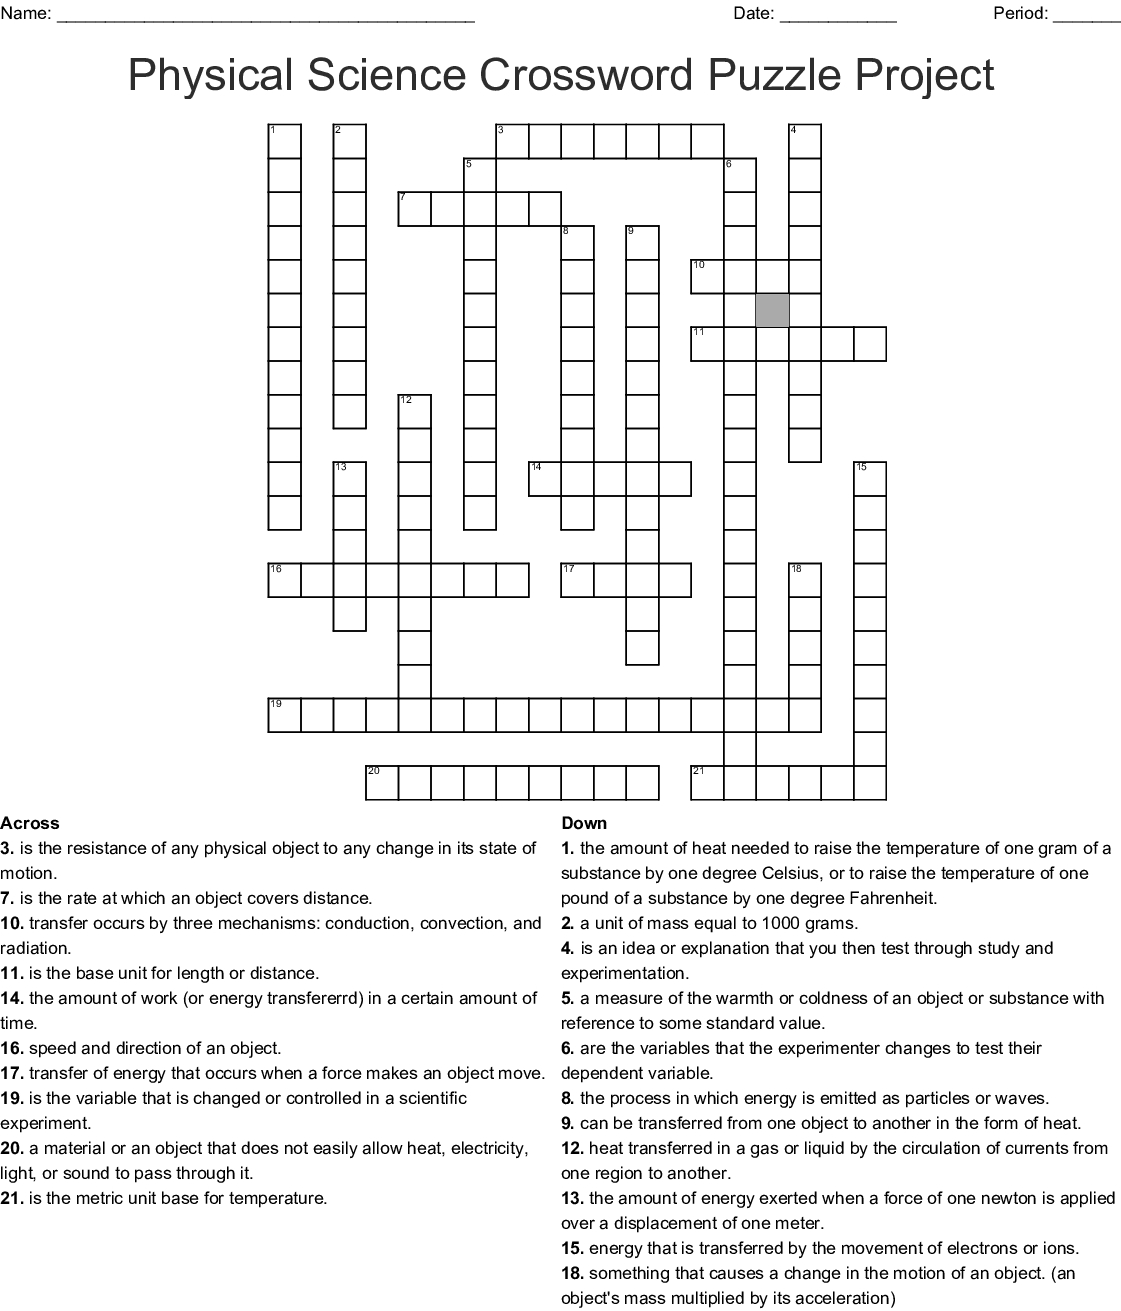 Free Crossword Physical Science Puzzle Printable